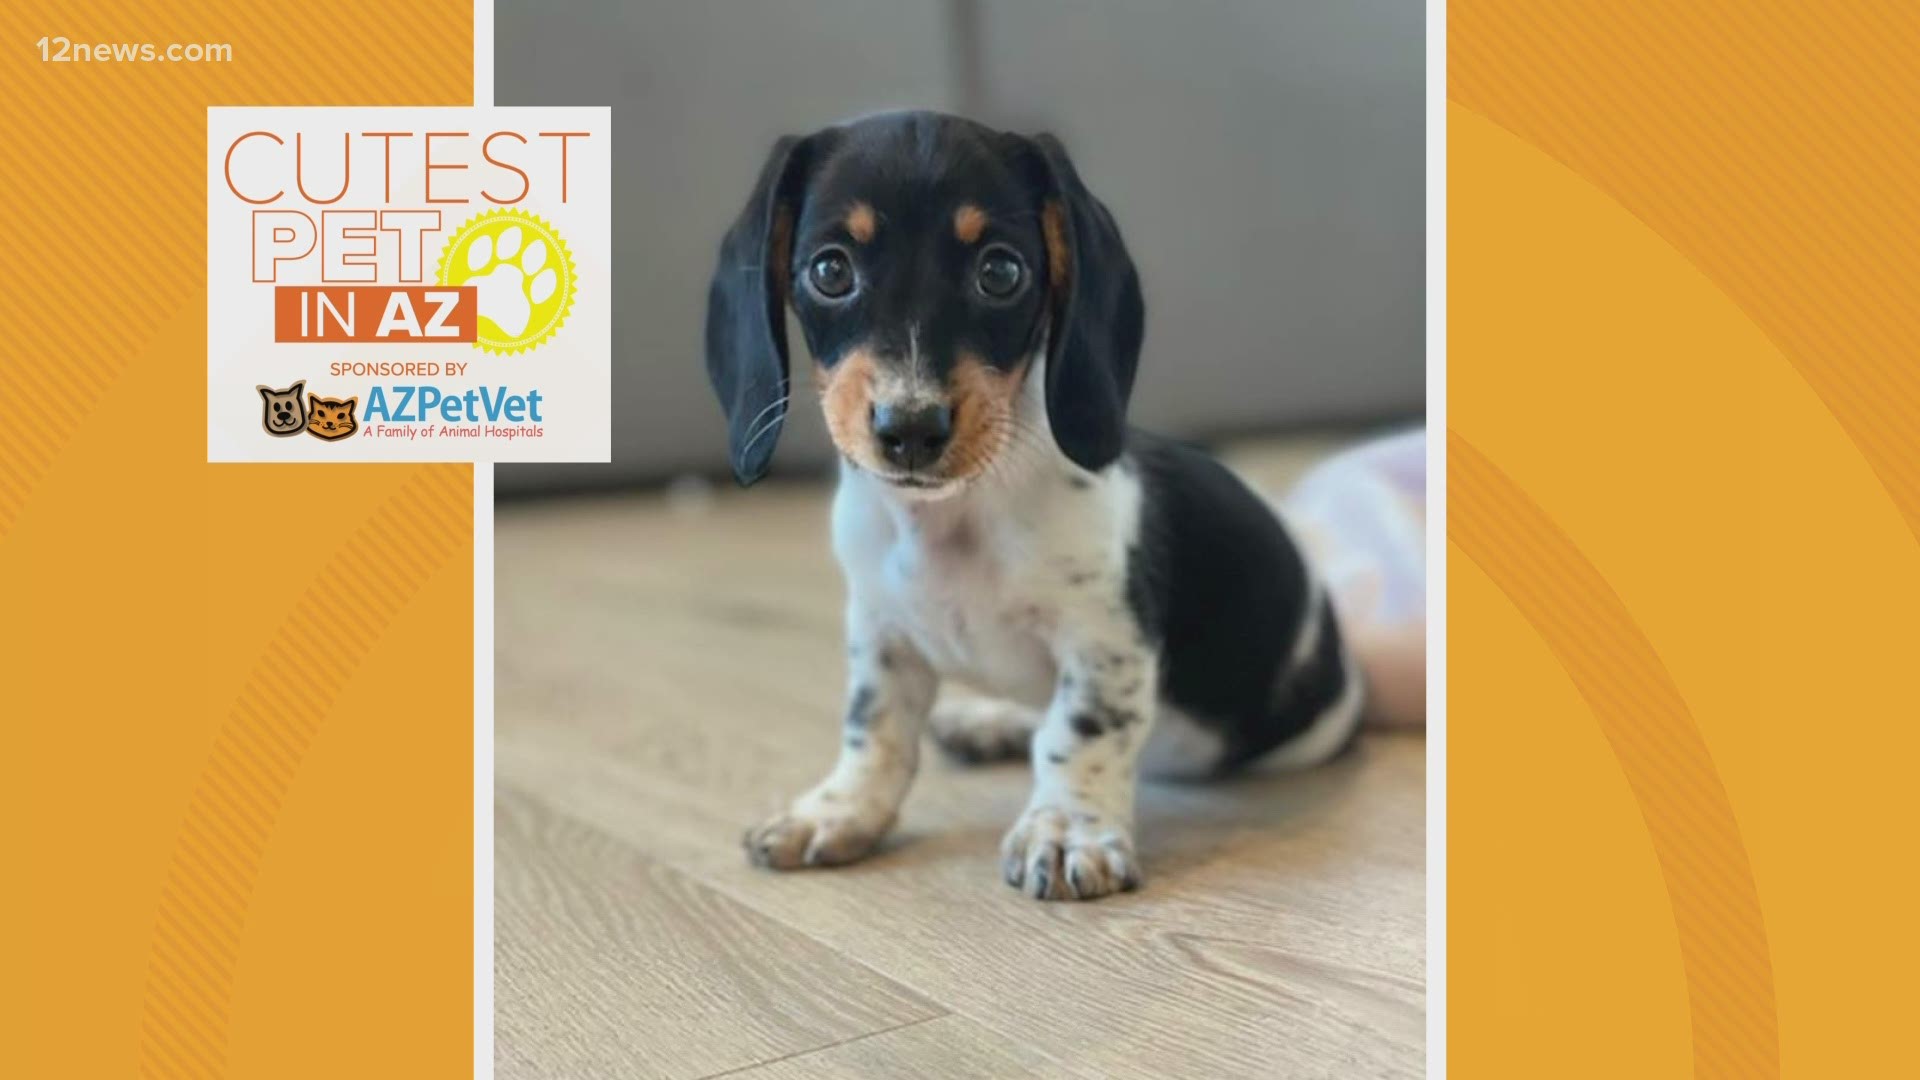 We asked for your cutest pets and boy, did you deliver! Here is the third finalist for the 12 News' Cutest Pet in AZ contest.